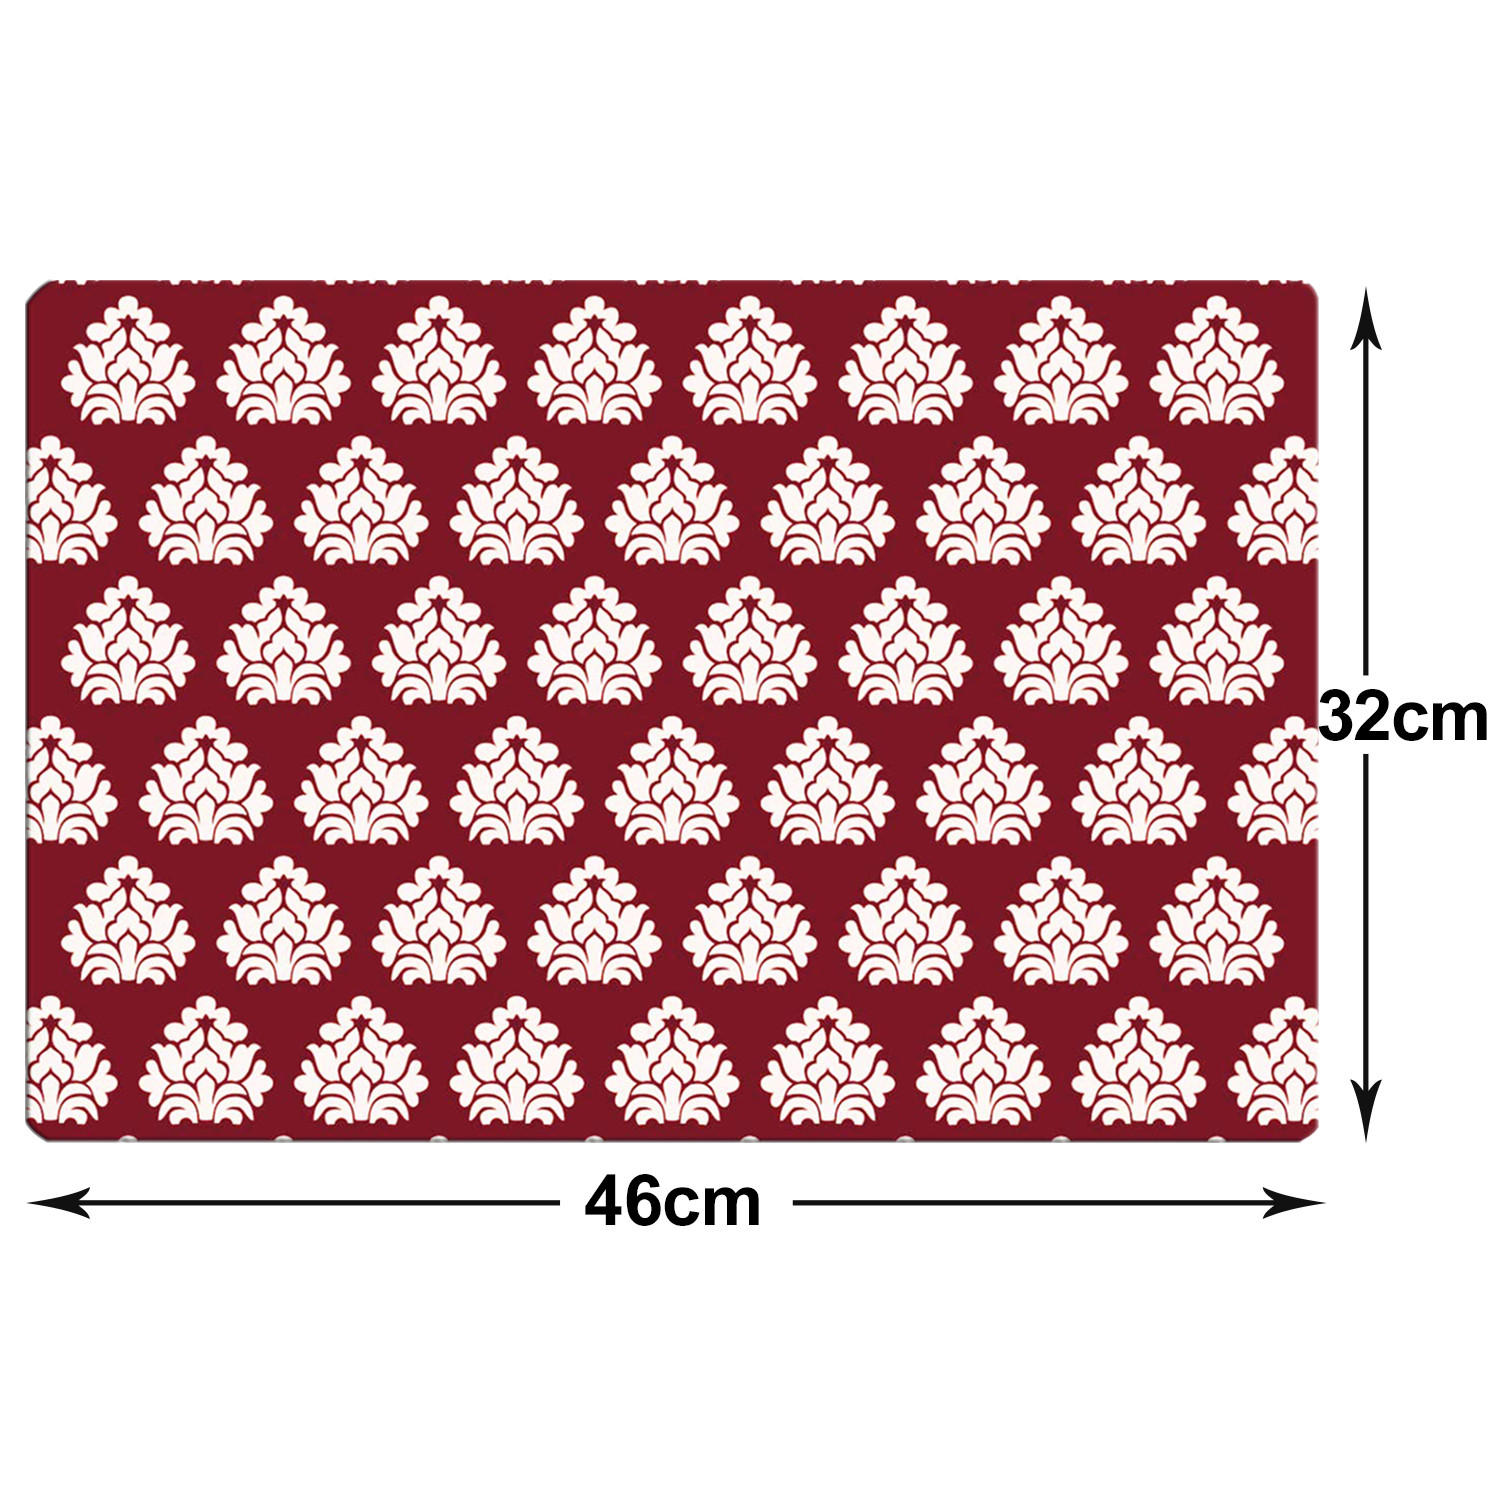 Kuber Industries Multiuses Flower Print PVC Table Placemat for kitchen, Dining Table Set of 6 (Maroon)